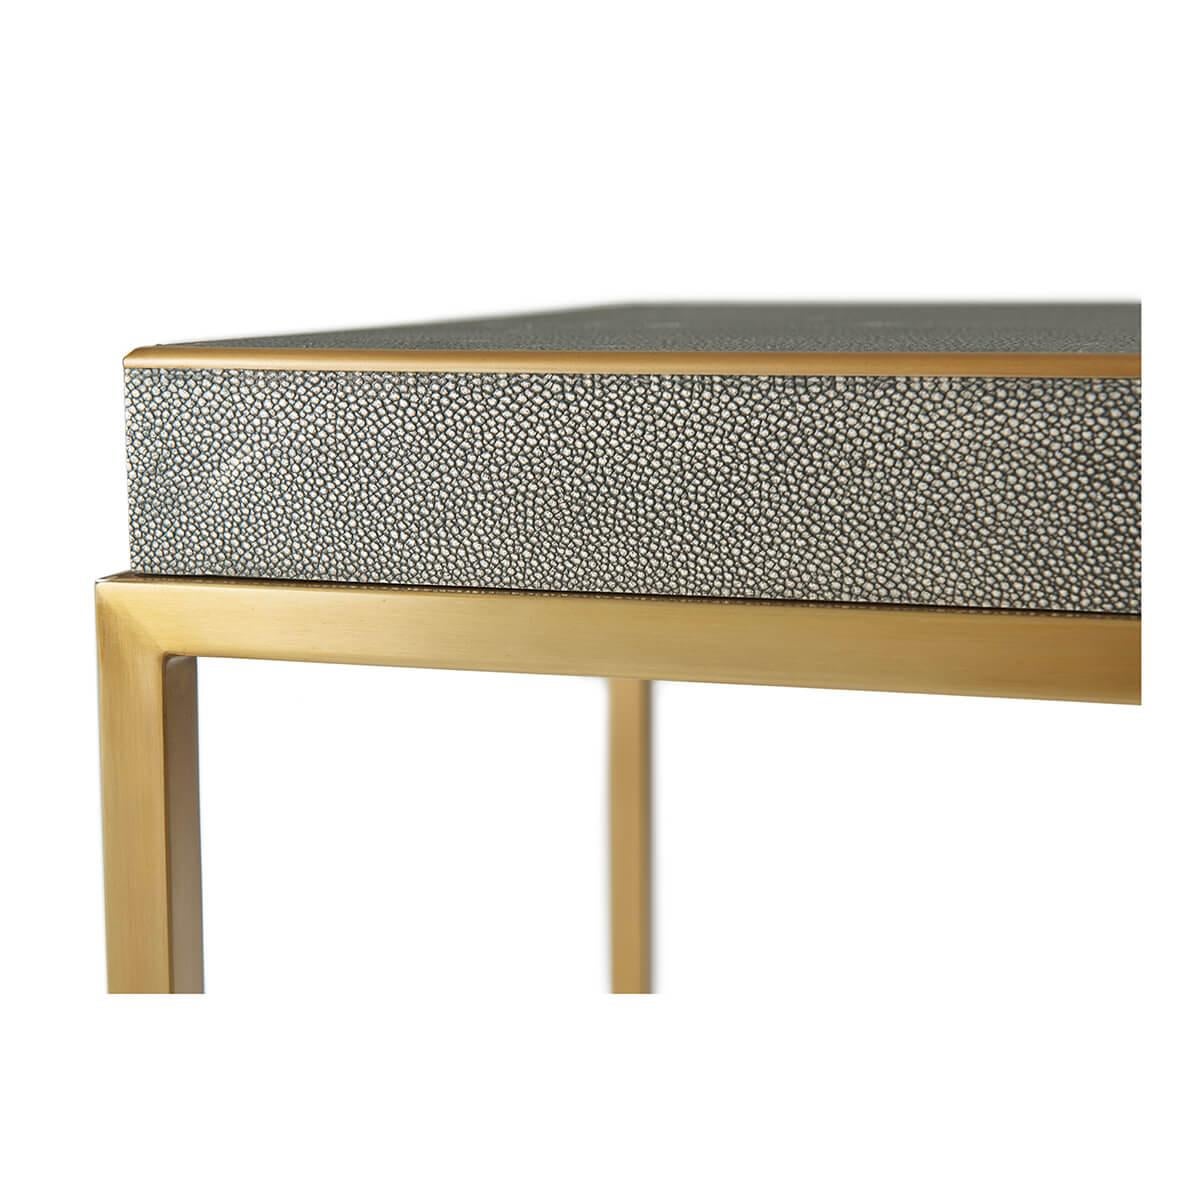 with a shagreen embossed dark tempest finish leather top, with brushed brass trim and open cubed form base.

Dimensions: 28